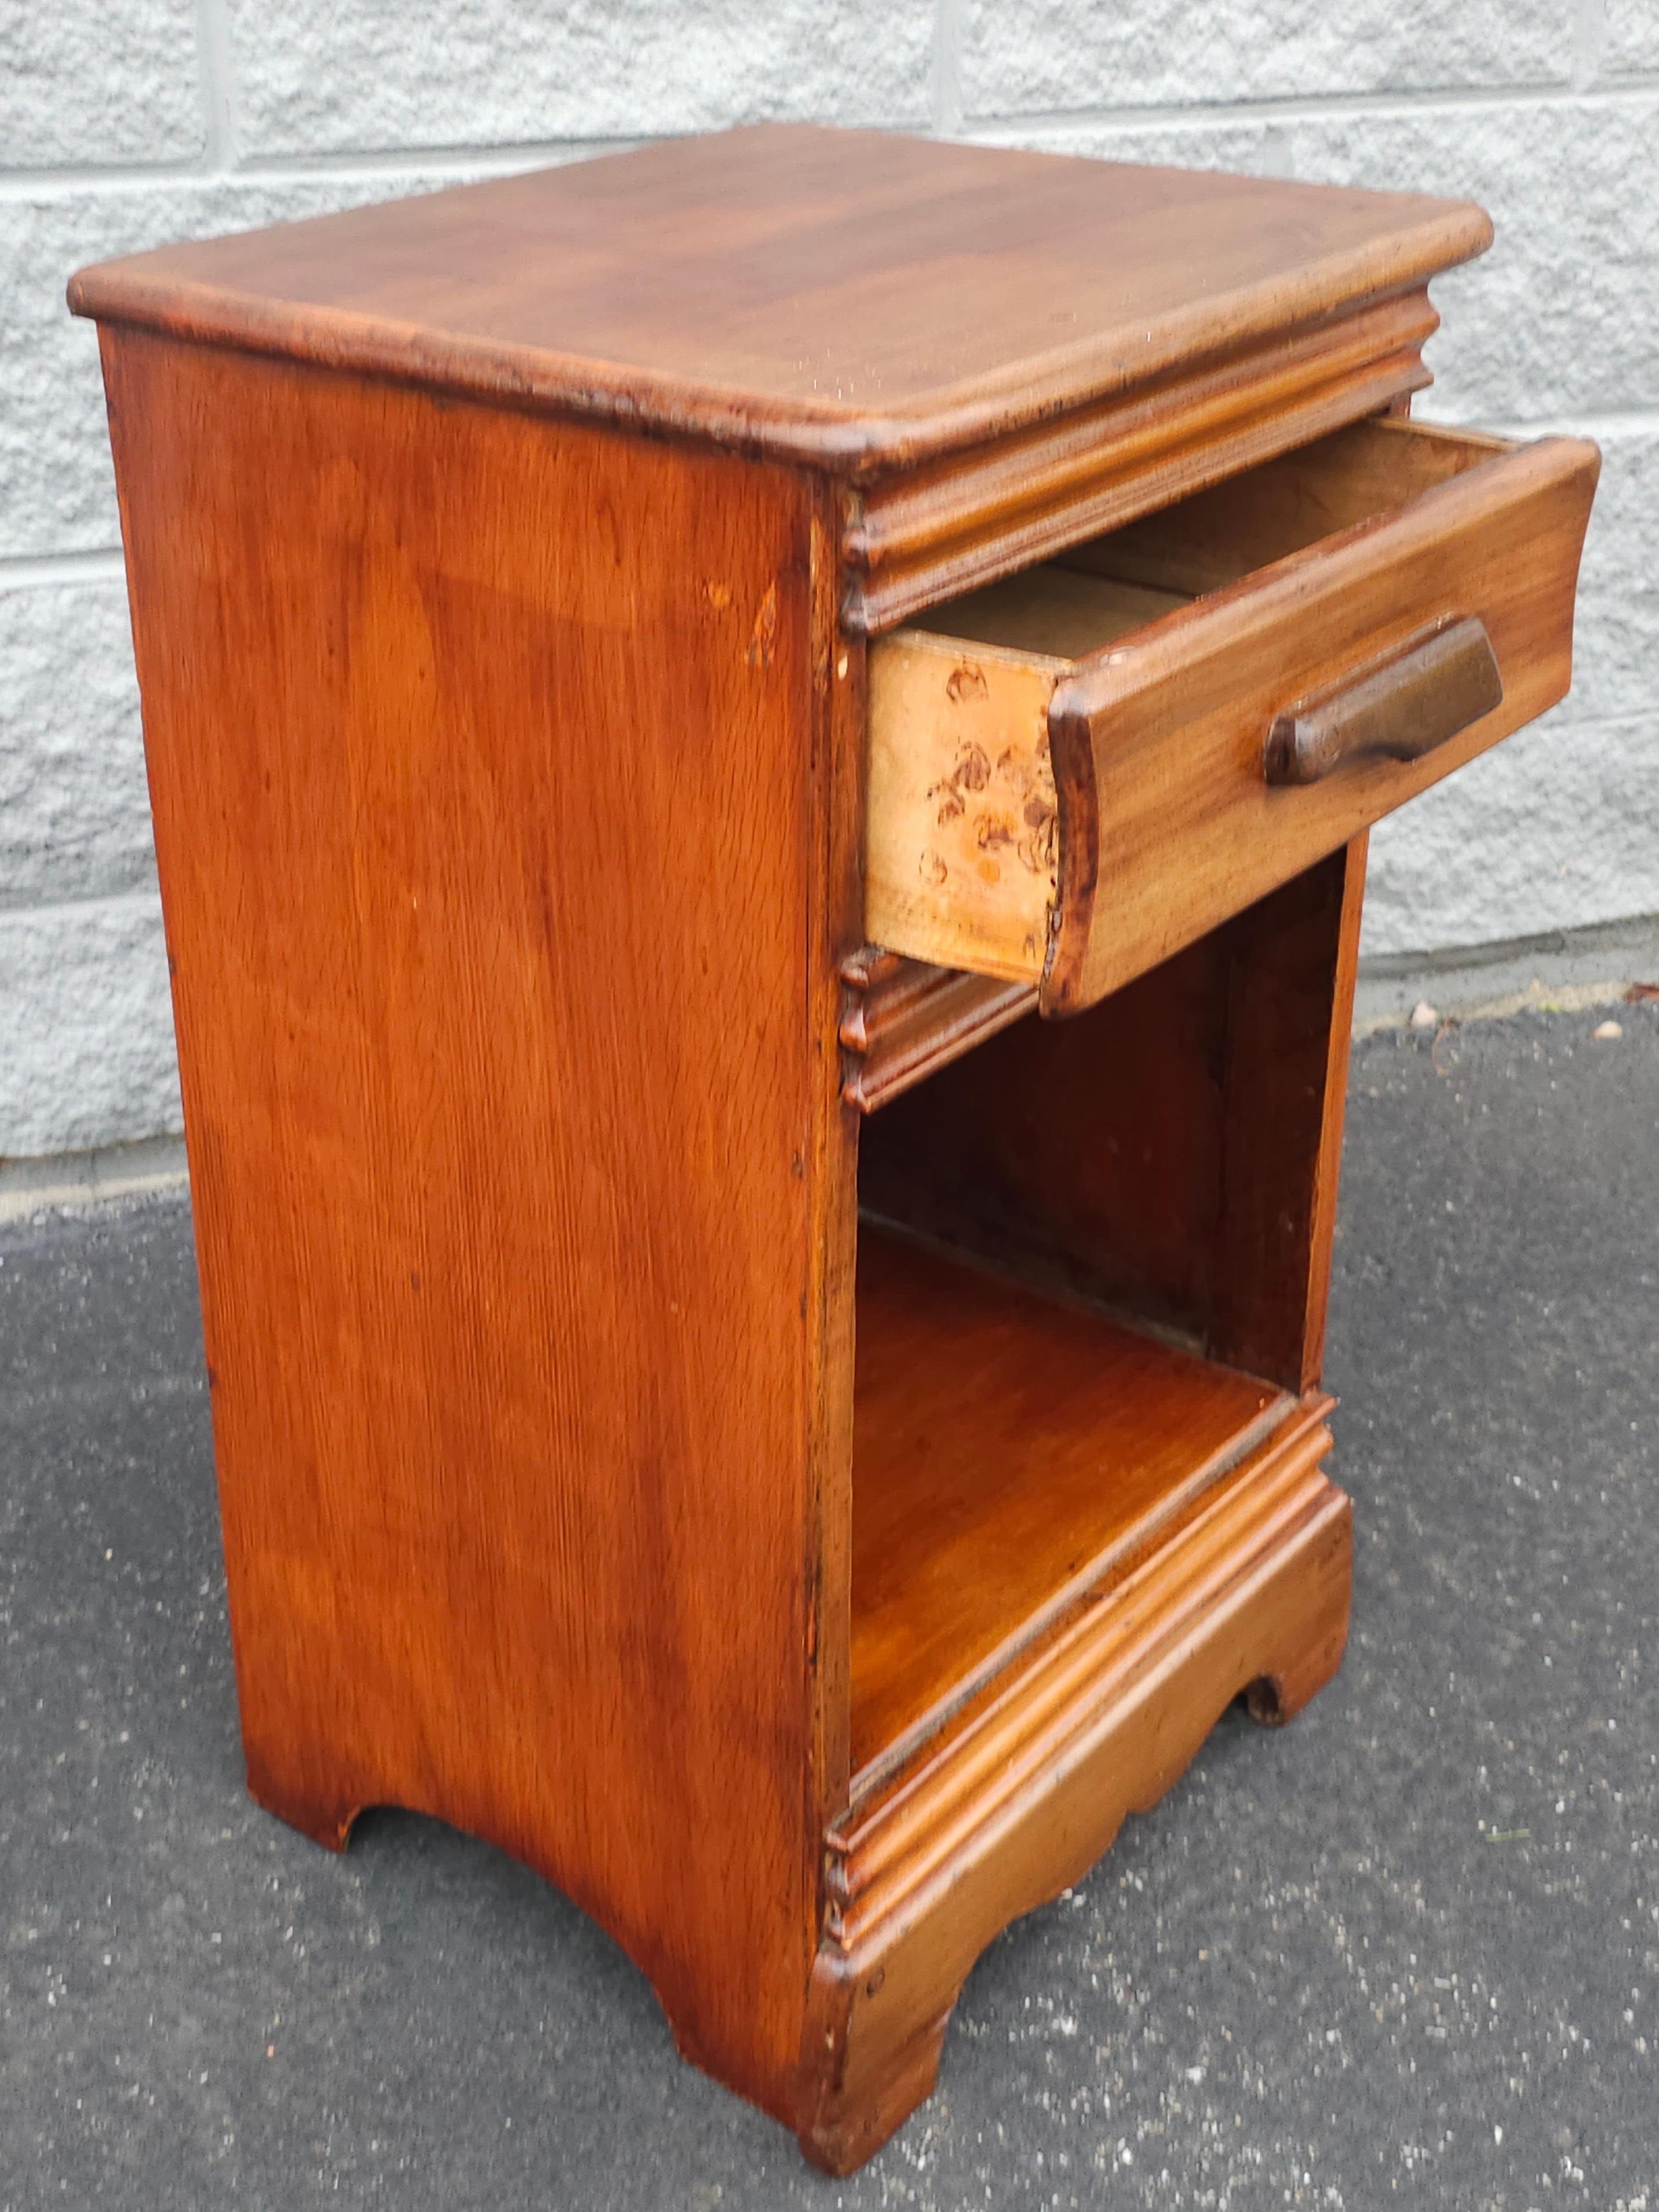 Early 20th Century Victorian Single Drawer Mahogany BedSide Table In Good Condition For Sale In Germantown, MD